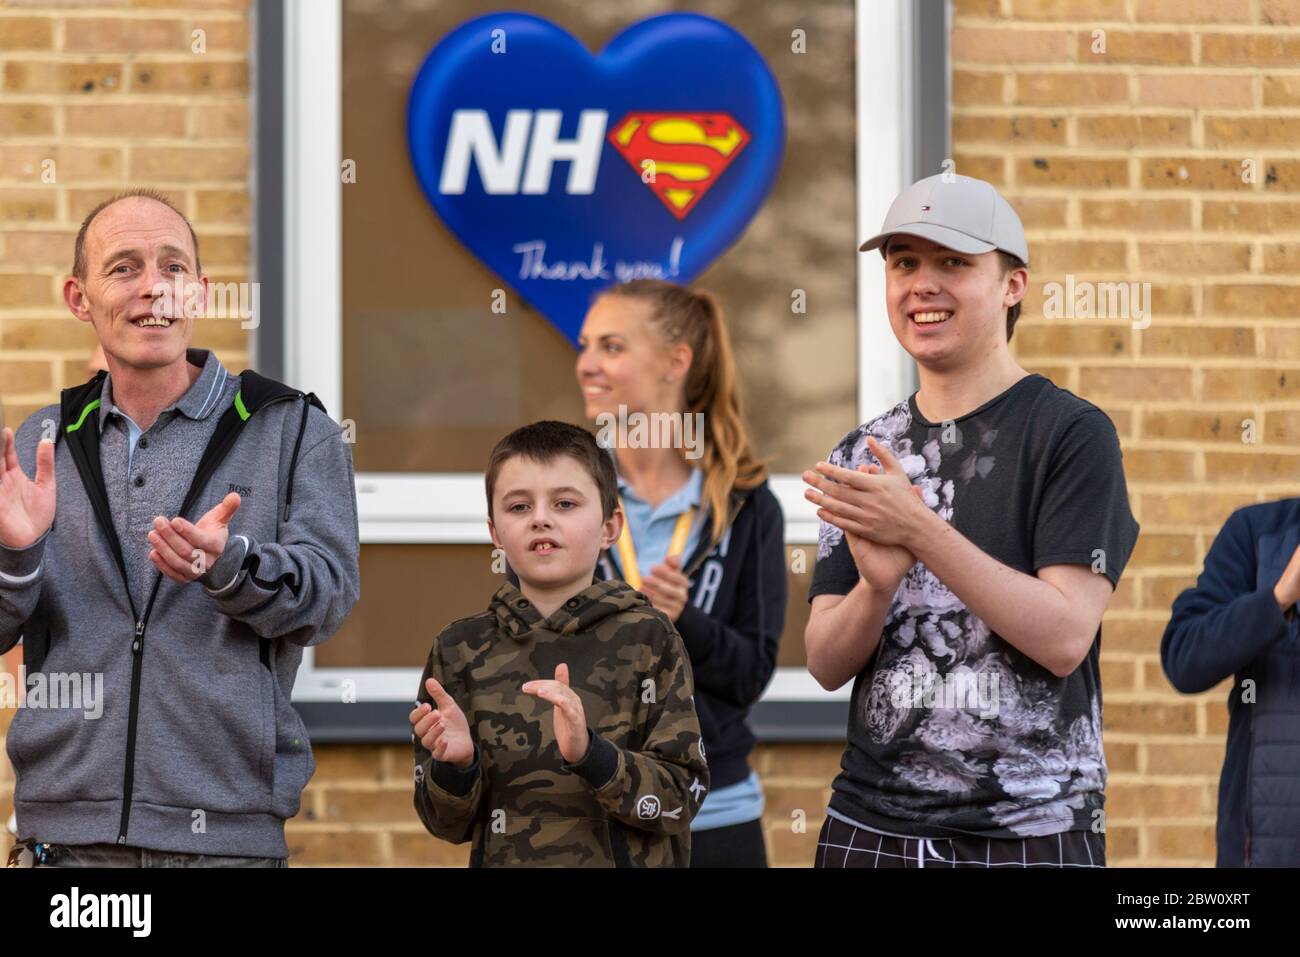 Final clap for carers at 8pm Thursday outside Southend University Hospital, Essex, UK. Members of the public clapping below NHS Superhero thank you Stock Photo